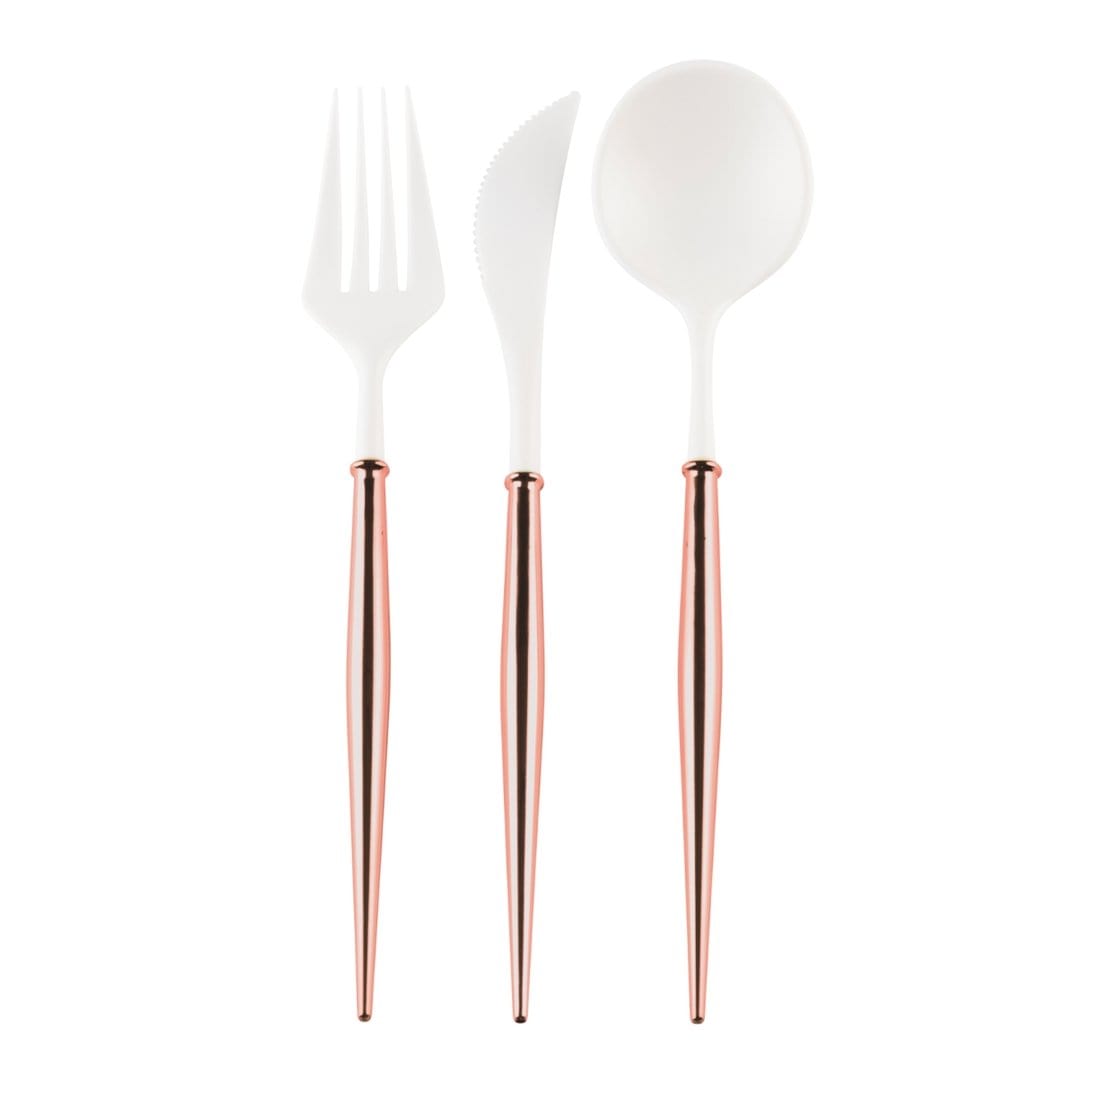 Cutlery White/ Rose Gold Handle S/ 24PC